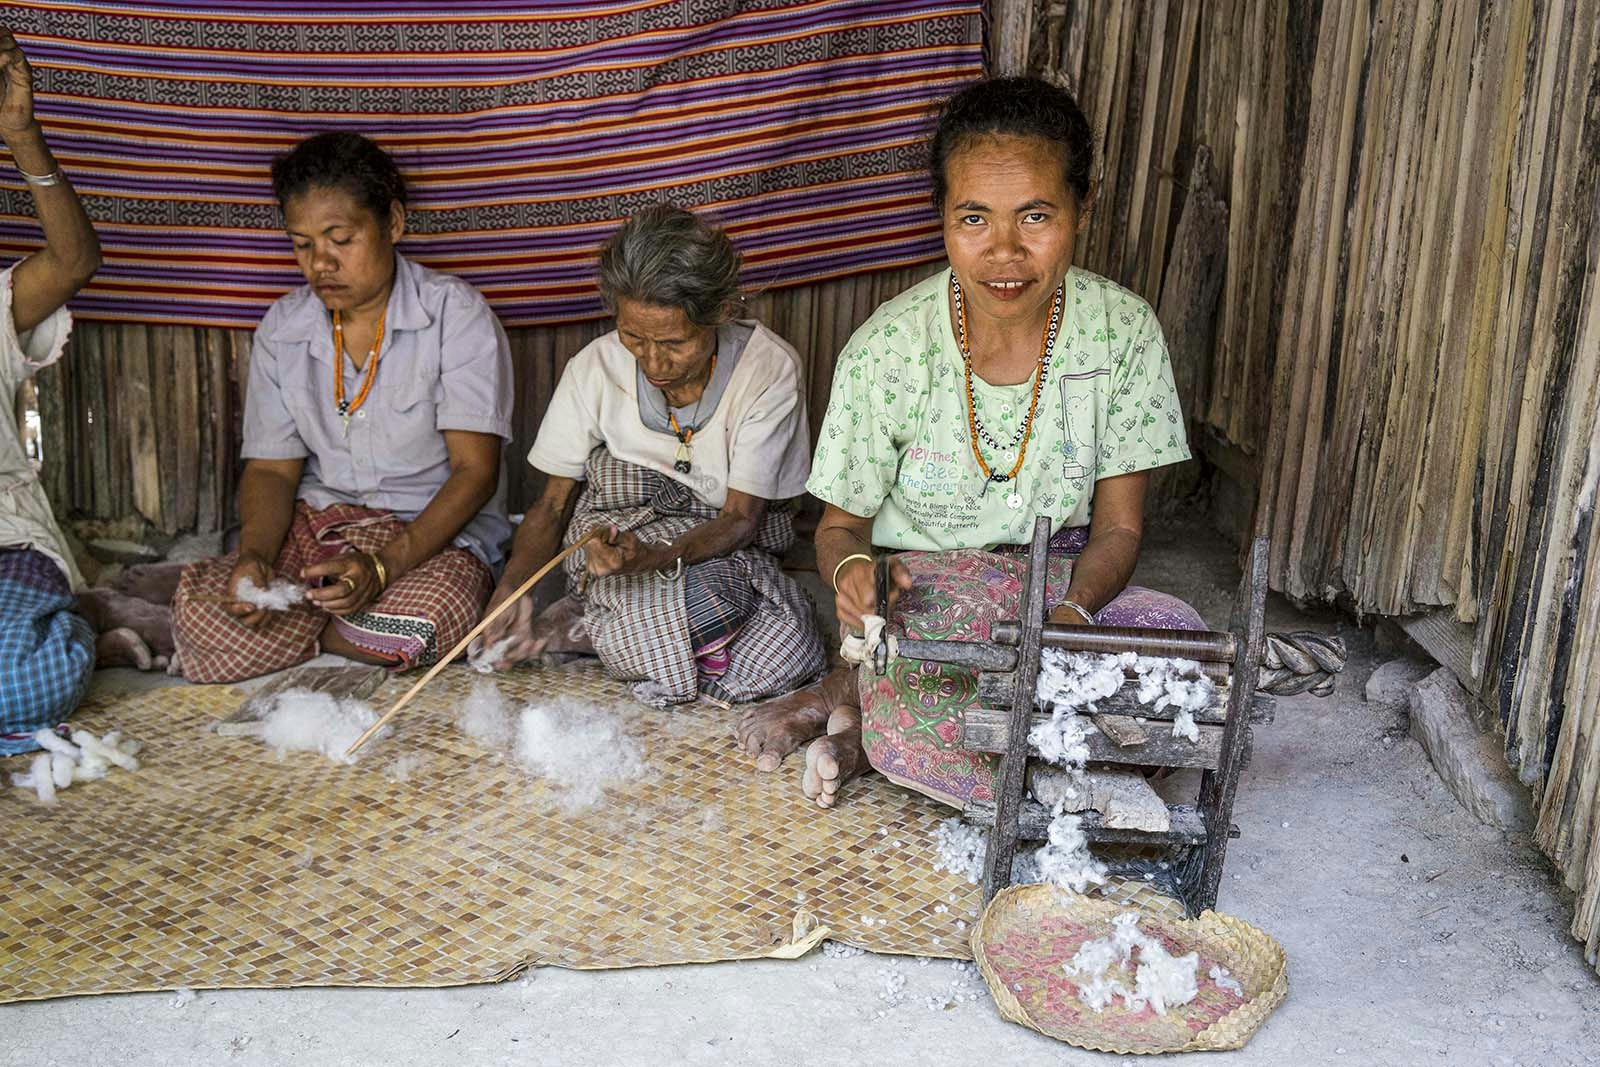 Three women sitting on a woven mat and dressed in pastel clothing work with fibers to make string. Boti, East Nusa Tenggara, Indonesia.